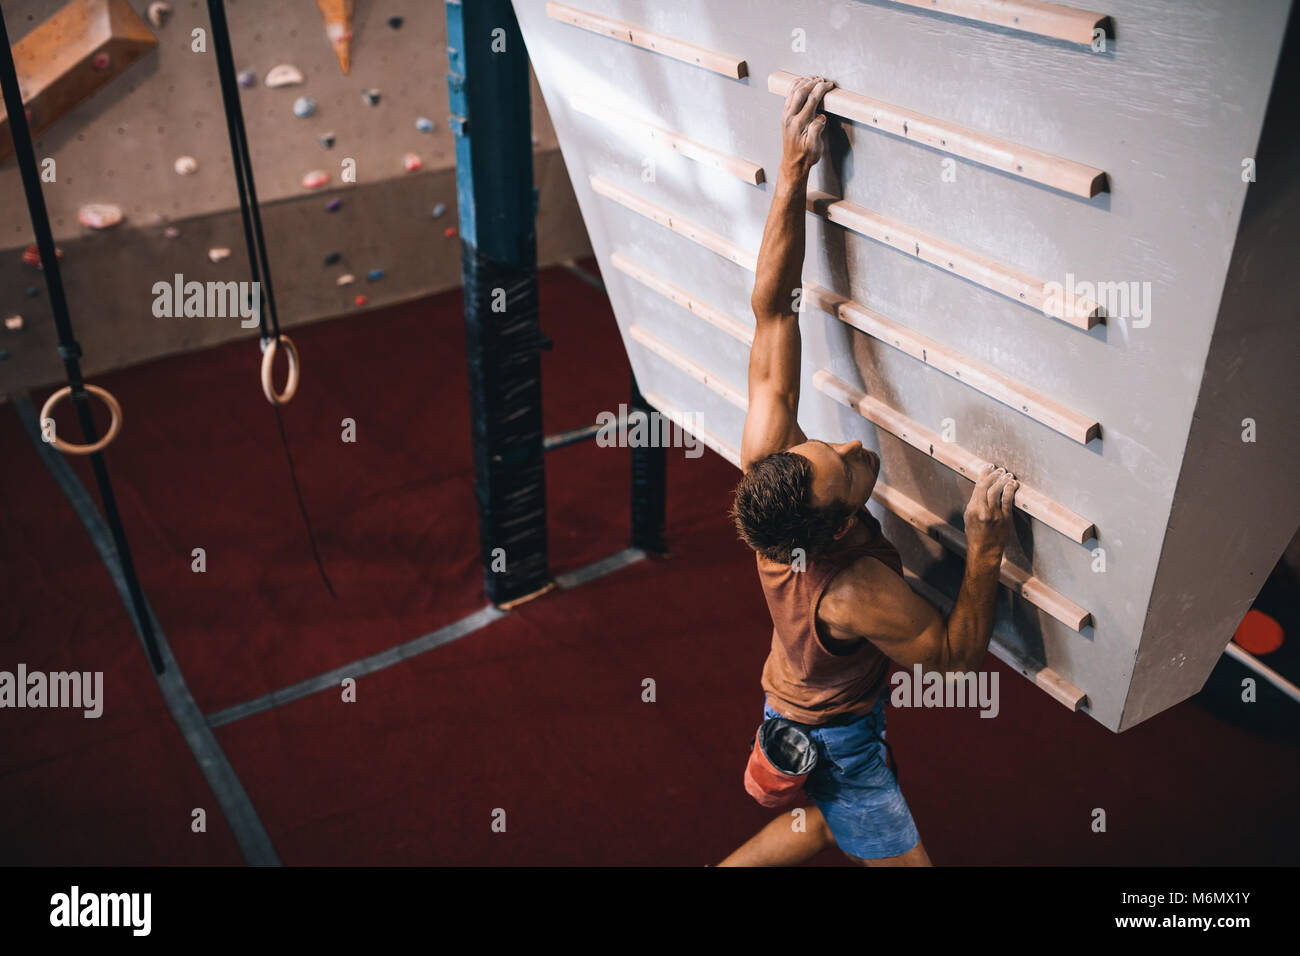 Young People Climbing Ropes In The Gym Stock Photo - Download Image Now -  Hanging, 25-29 Years, 30-39 Years - iStock